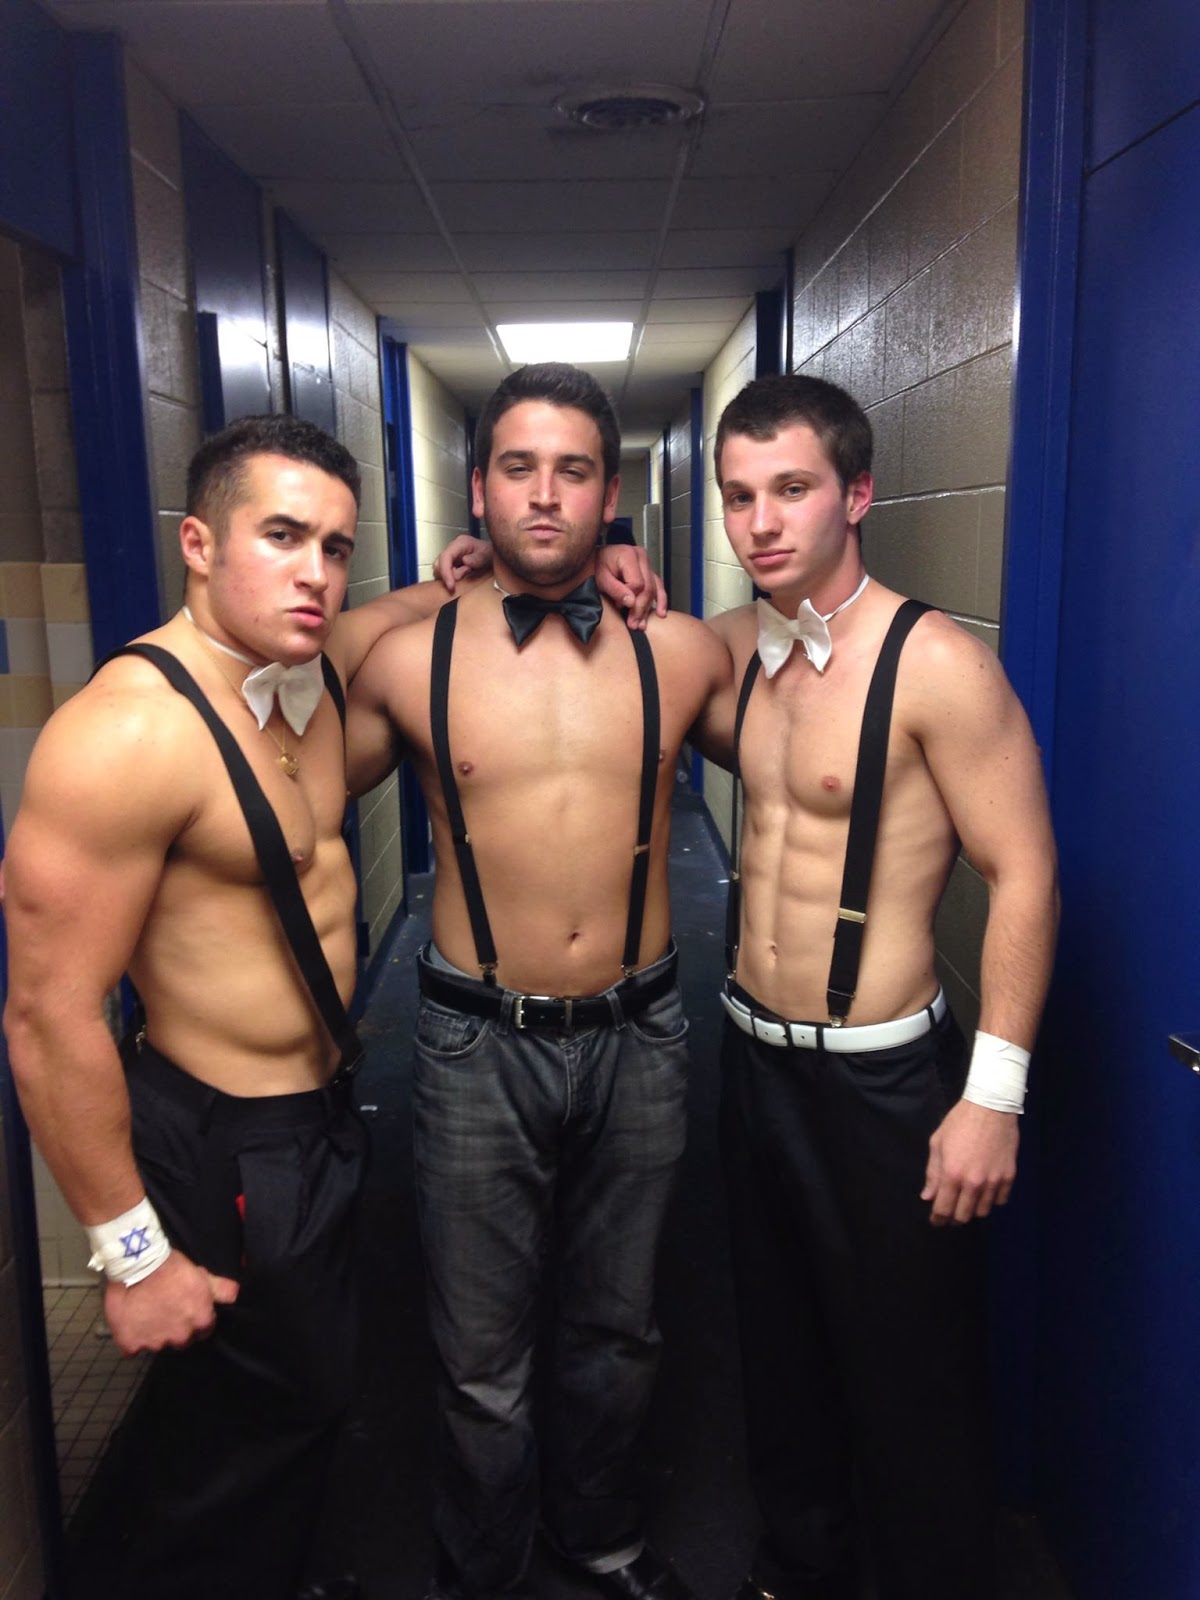 Shirtless Freedom: Shirtless Halloween Costume Submissions 2013